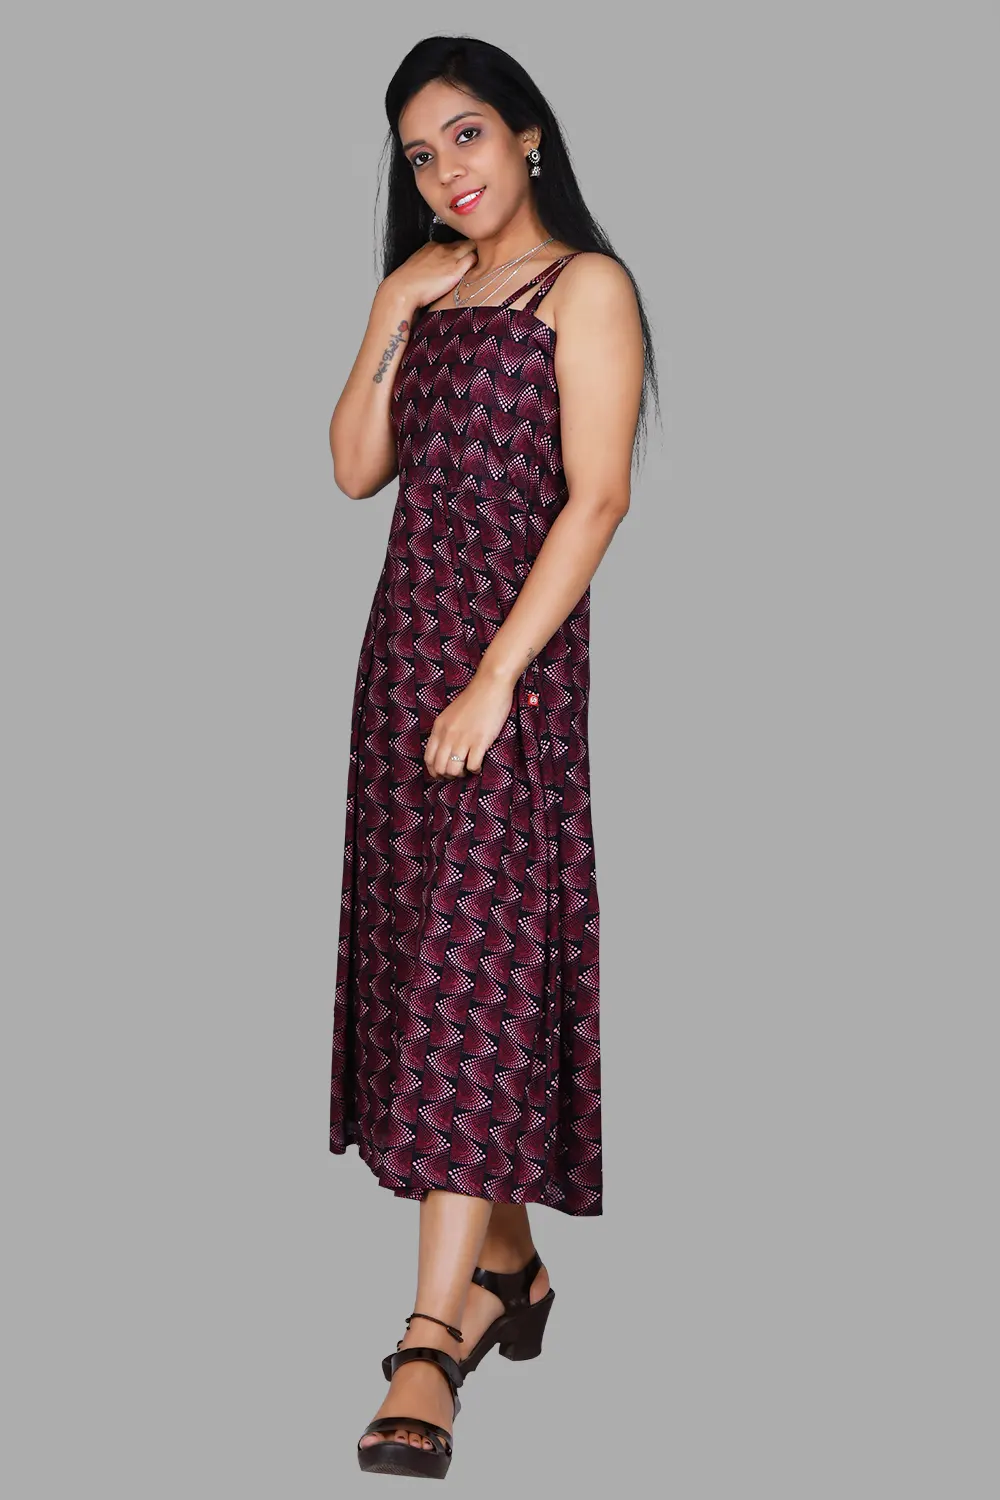 Ladies One Piece Dress at Rs.300/Piece in aligarh offer by Pass  International